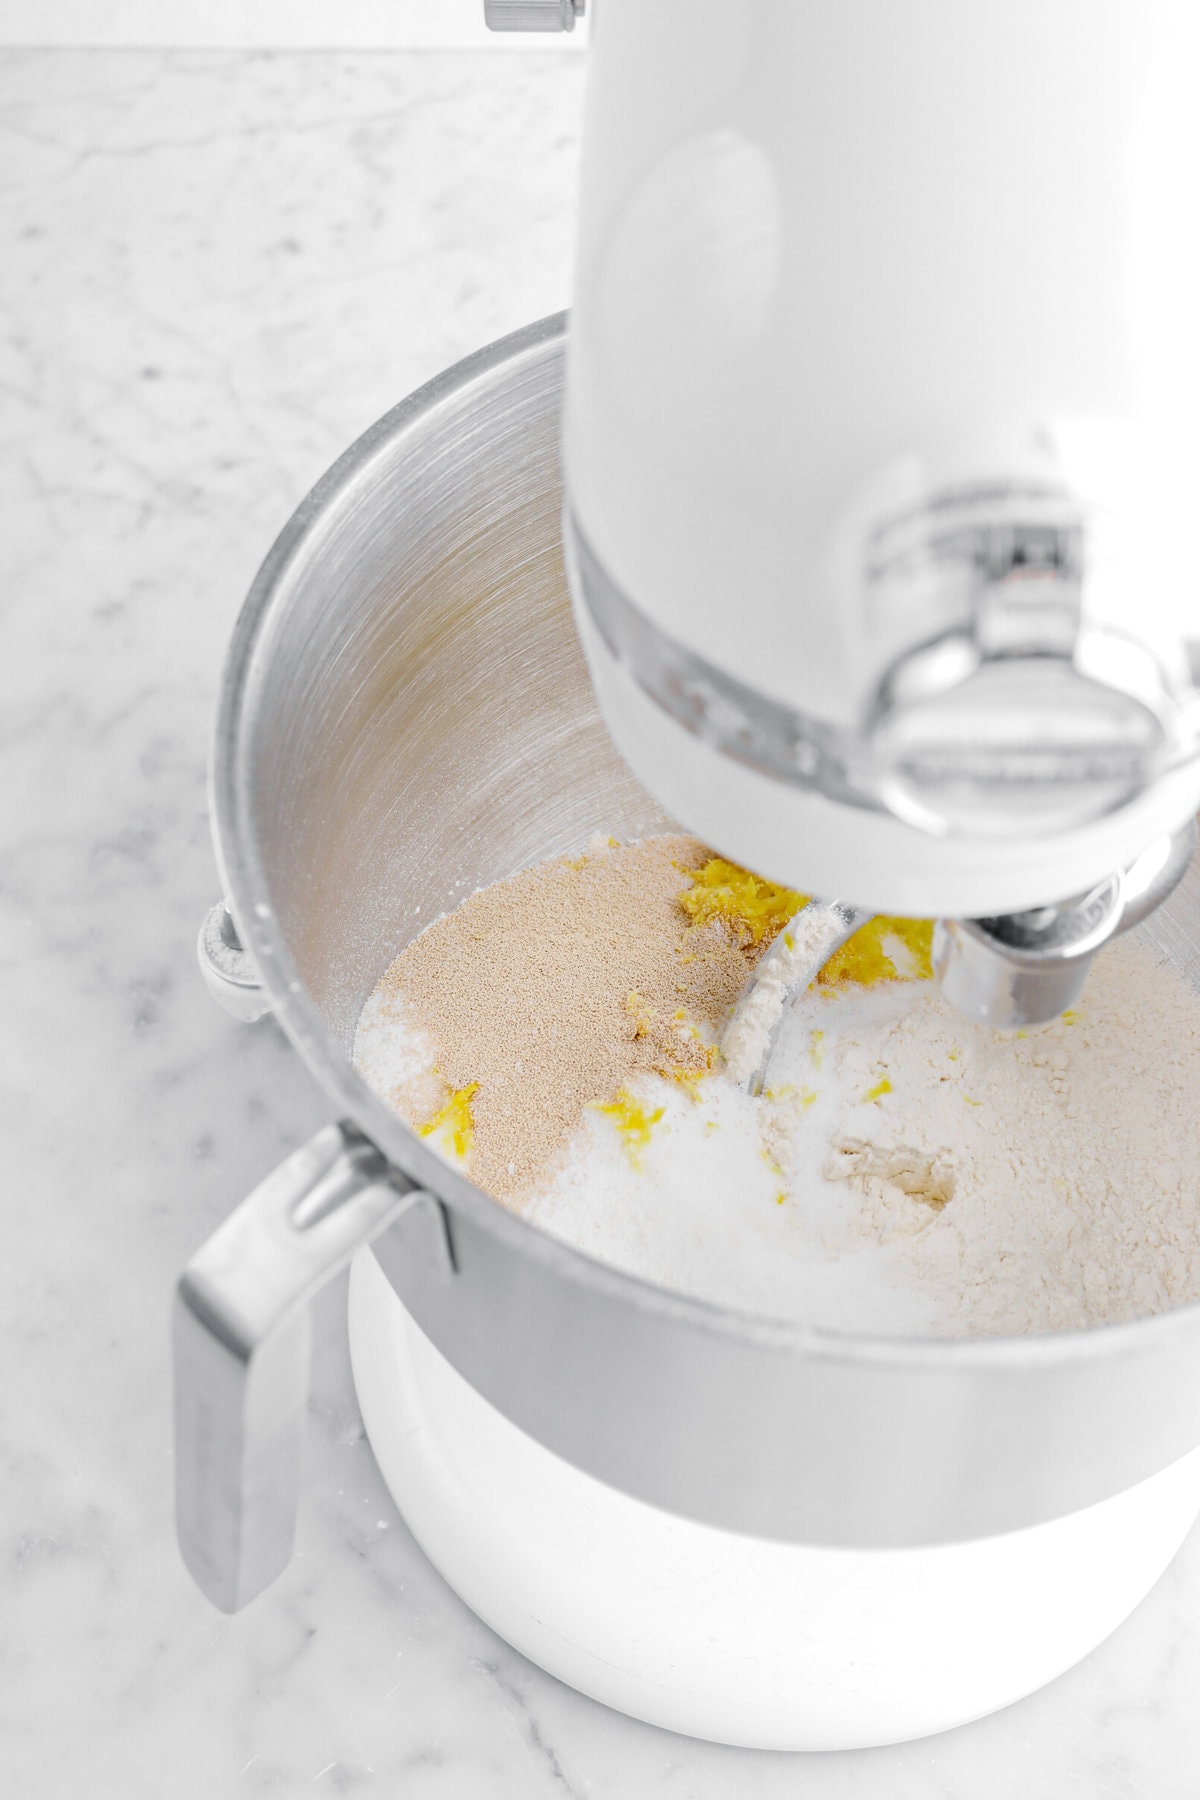 yeast, flour, sugar, and lemon zest in stand mixer.